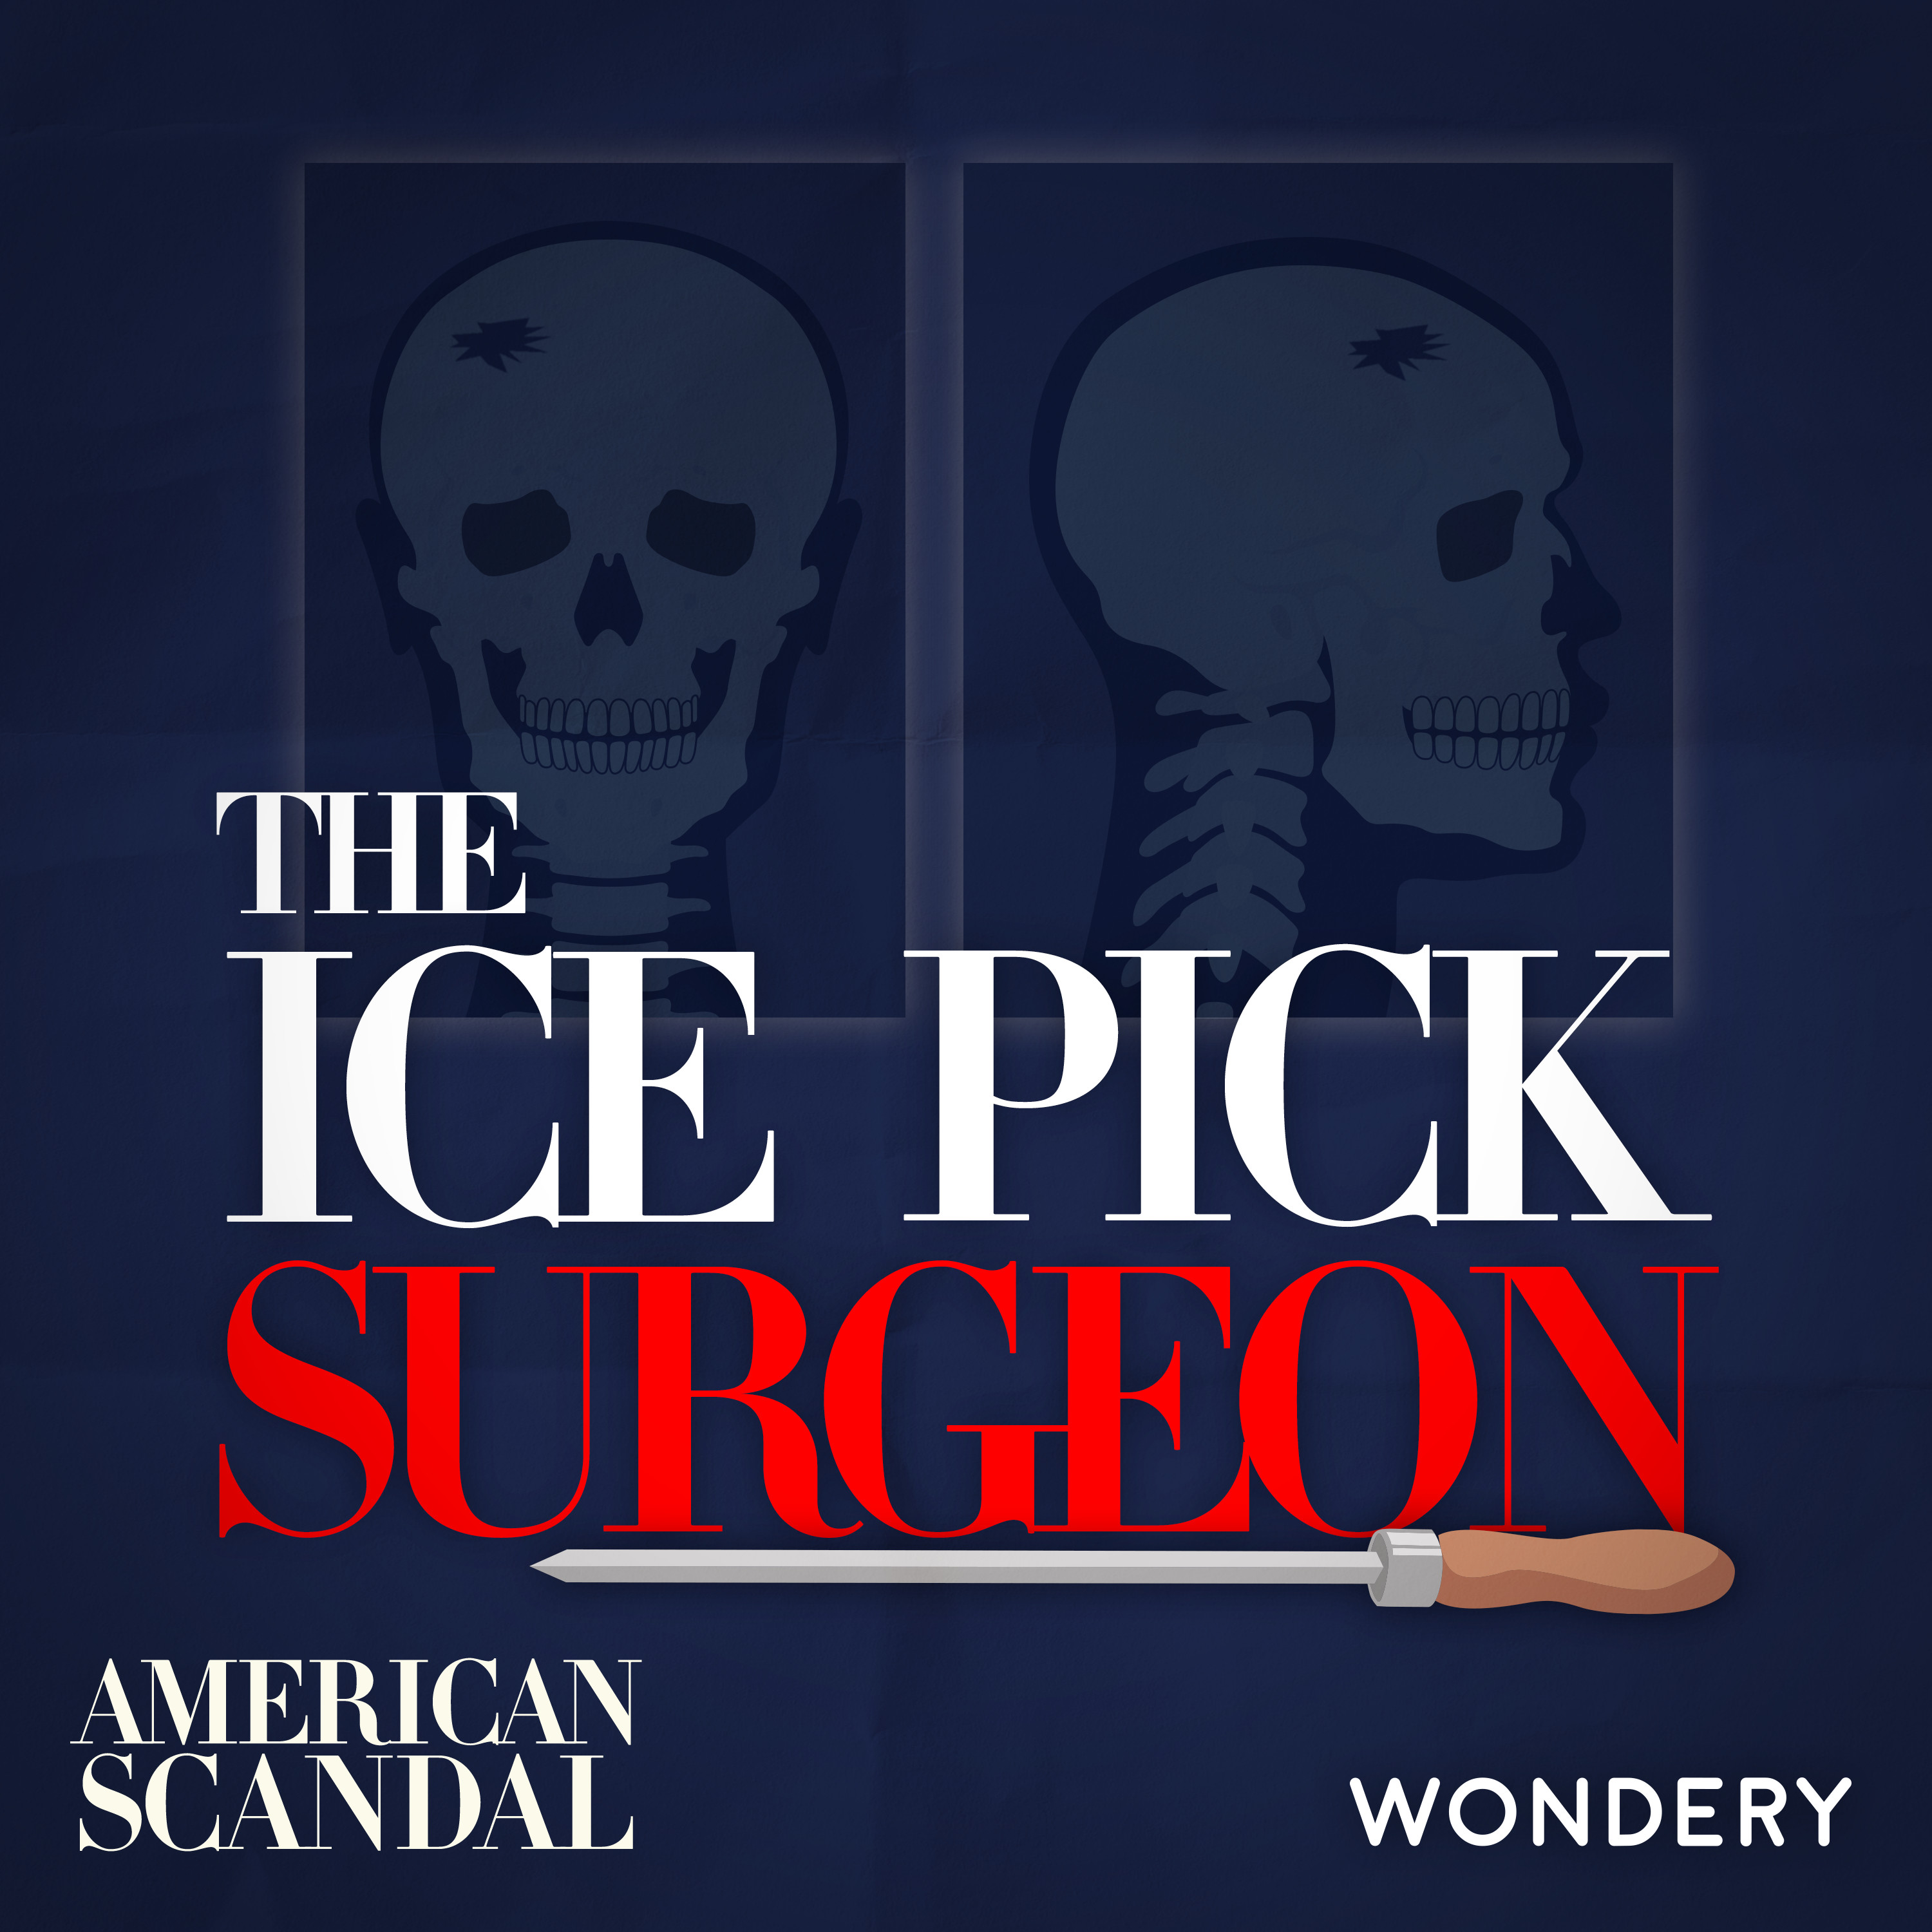 The Ice Pick Surgeon | Trial and Error | 2